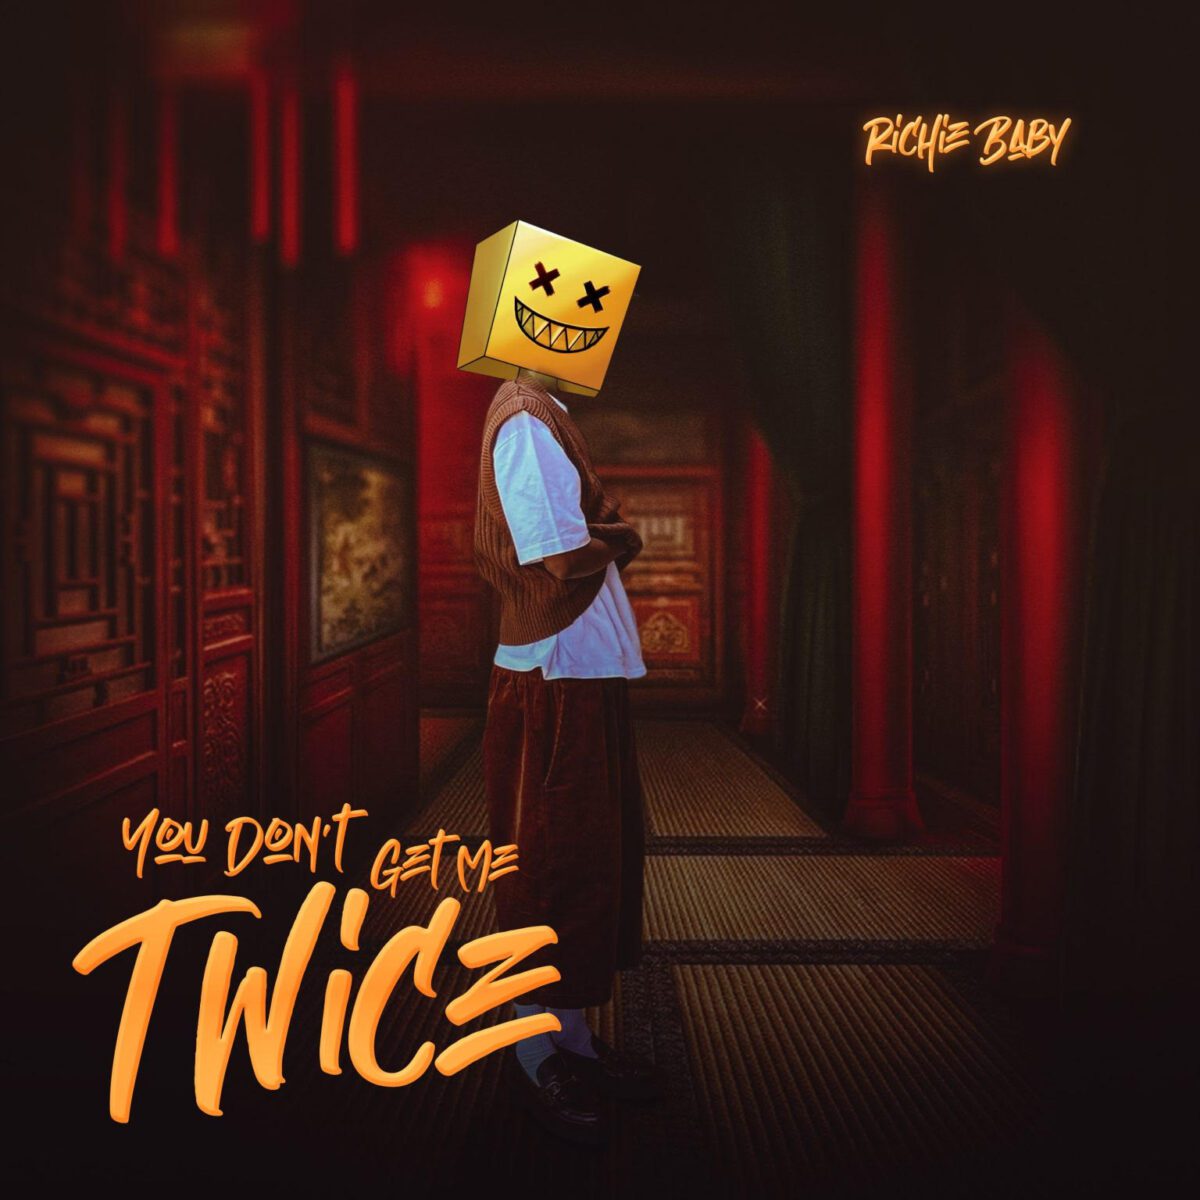 TMAQTALK MUSIC : Richie Baby – You Don’t Get Me Twice EP